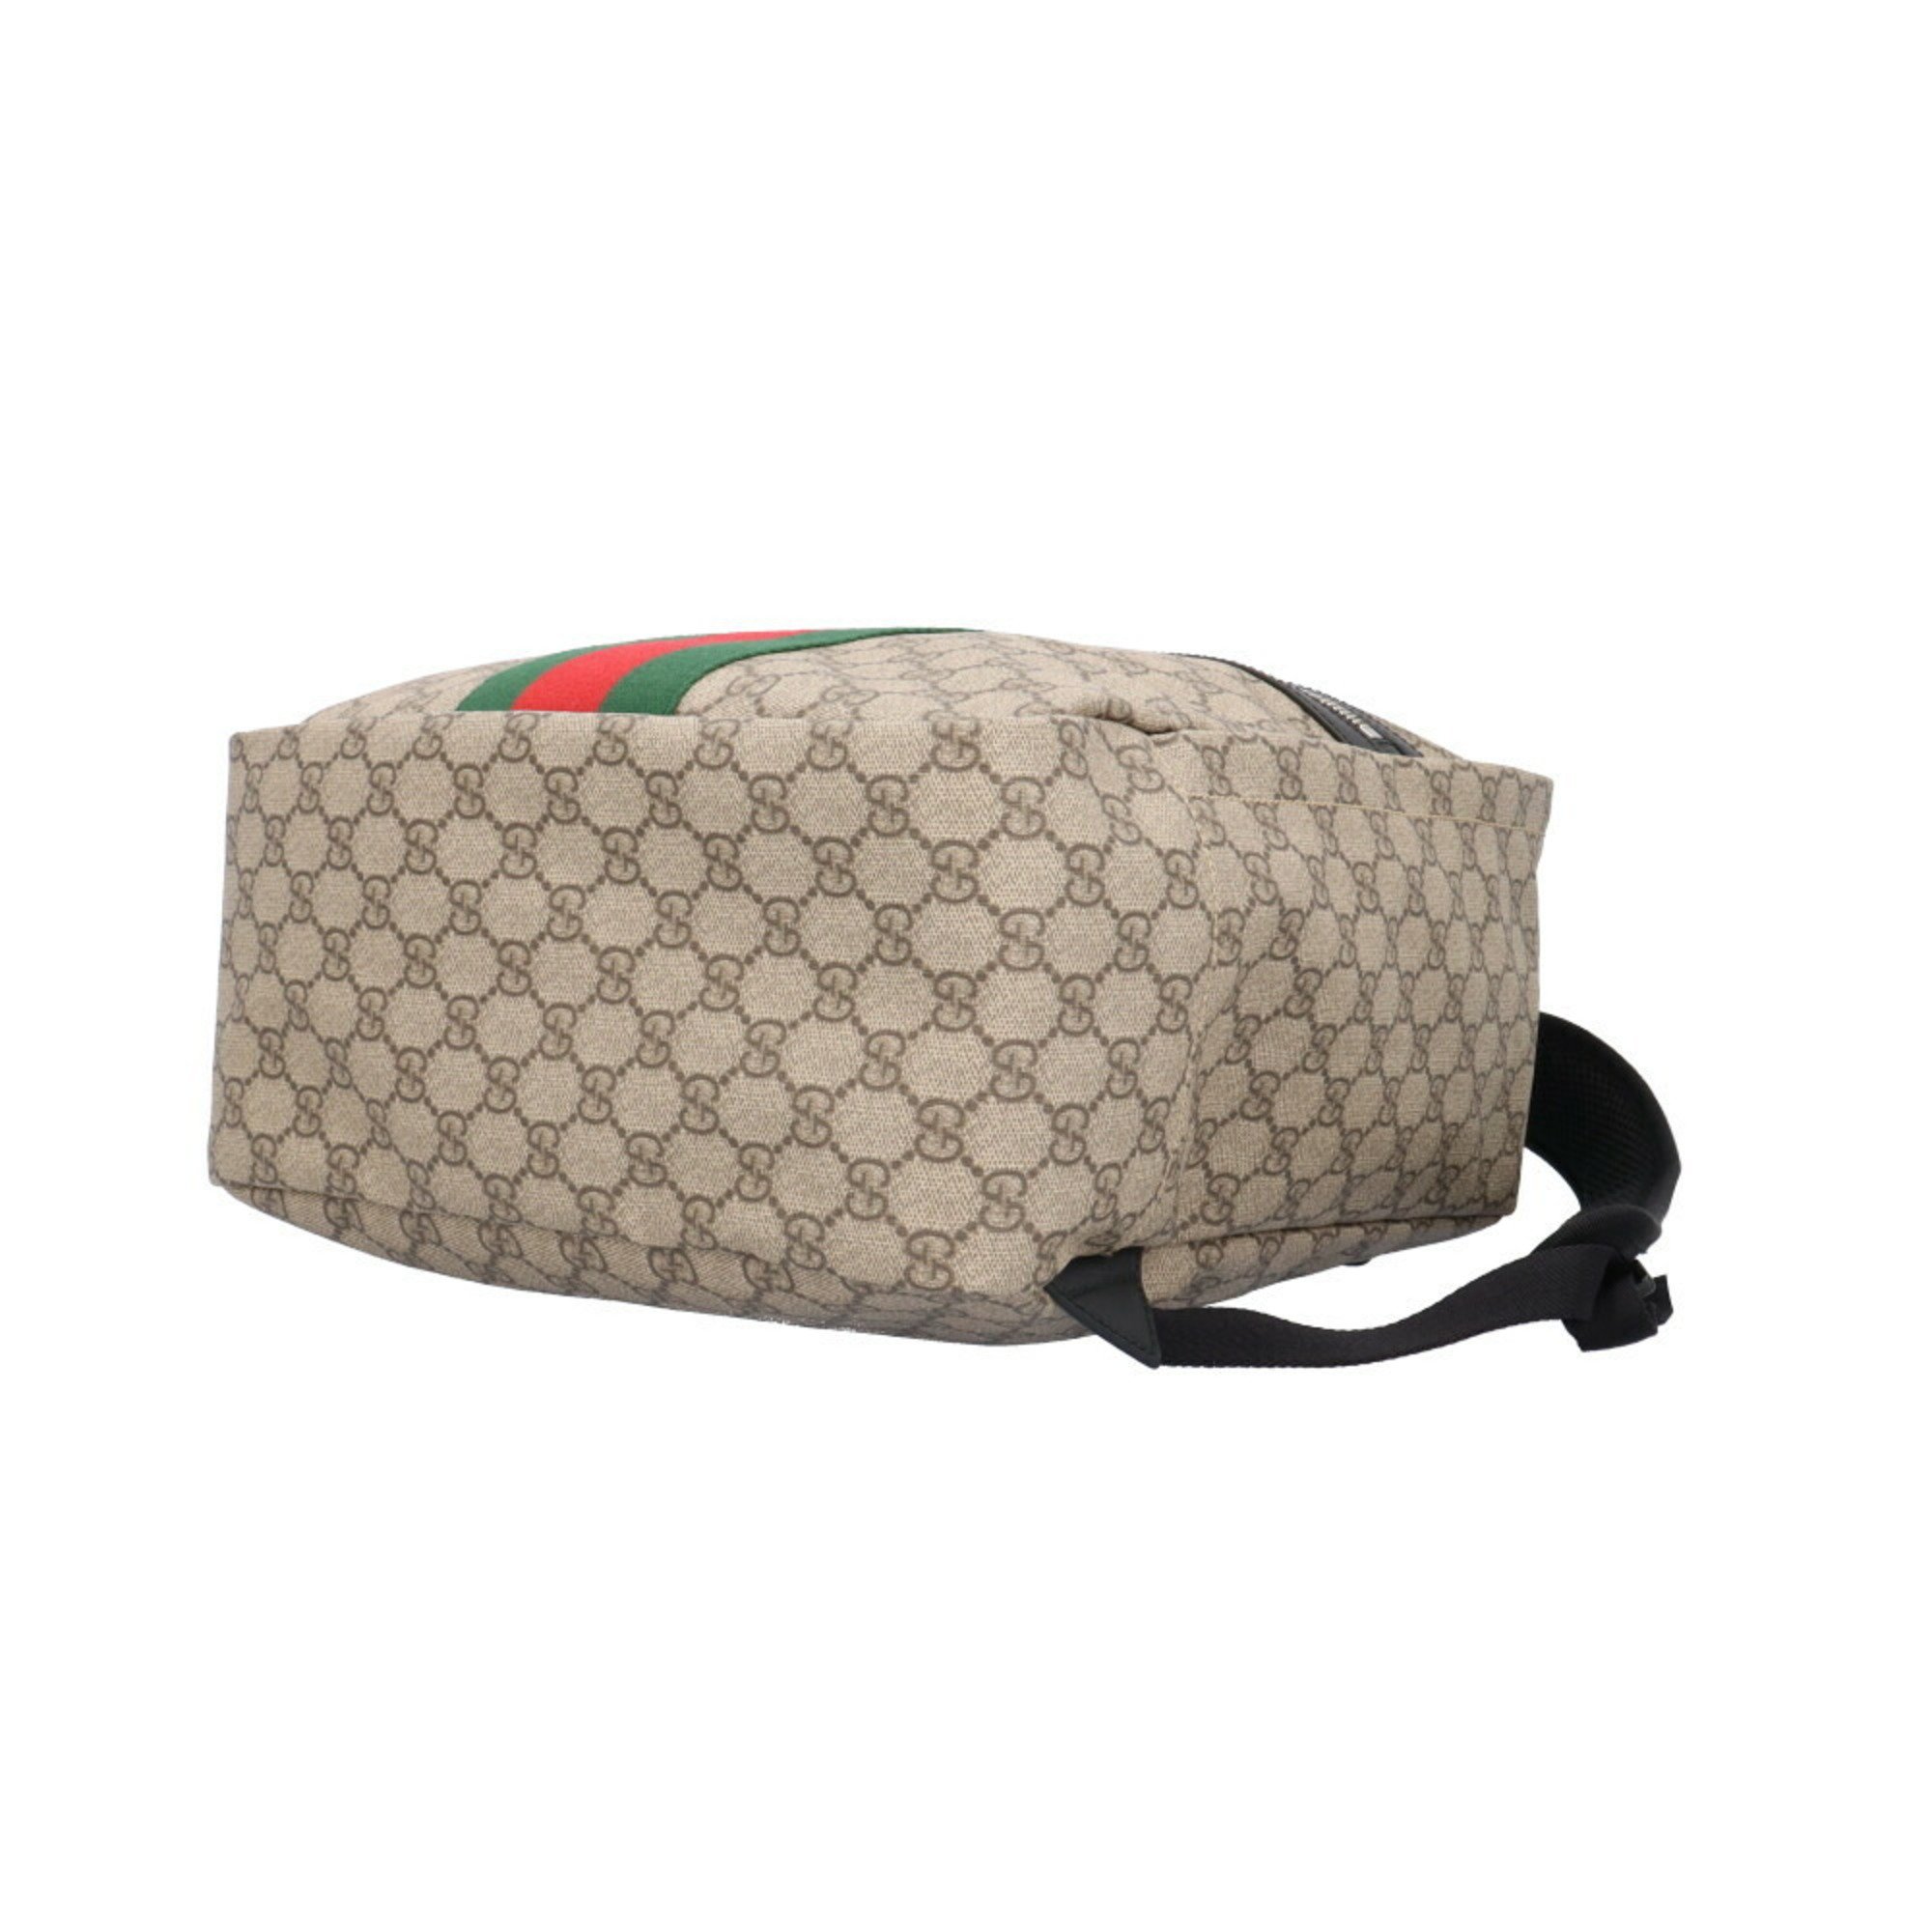 Gucci GG Supreme Sherry Line Backpack/Daypack Coated Canvas 495558 Unisex GUCCI